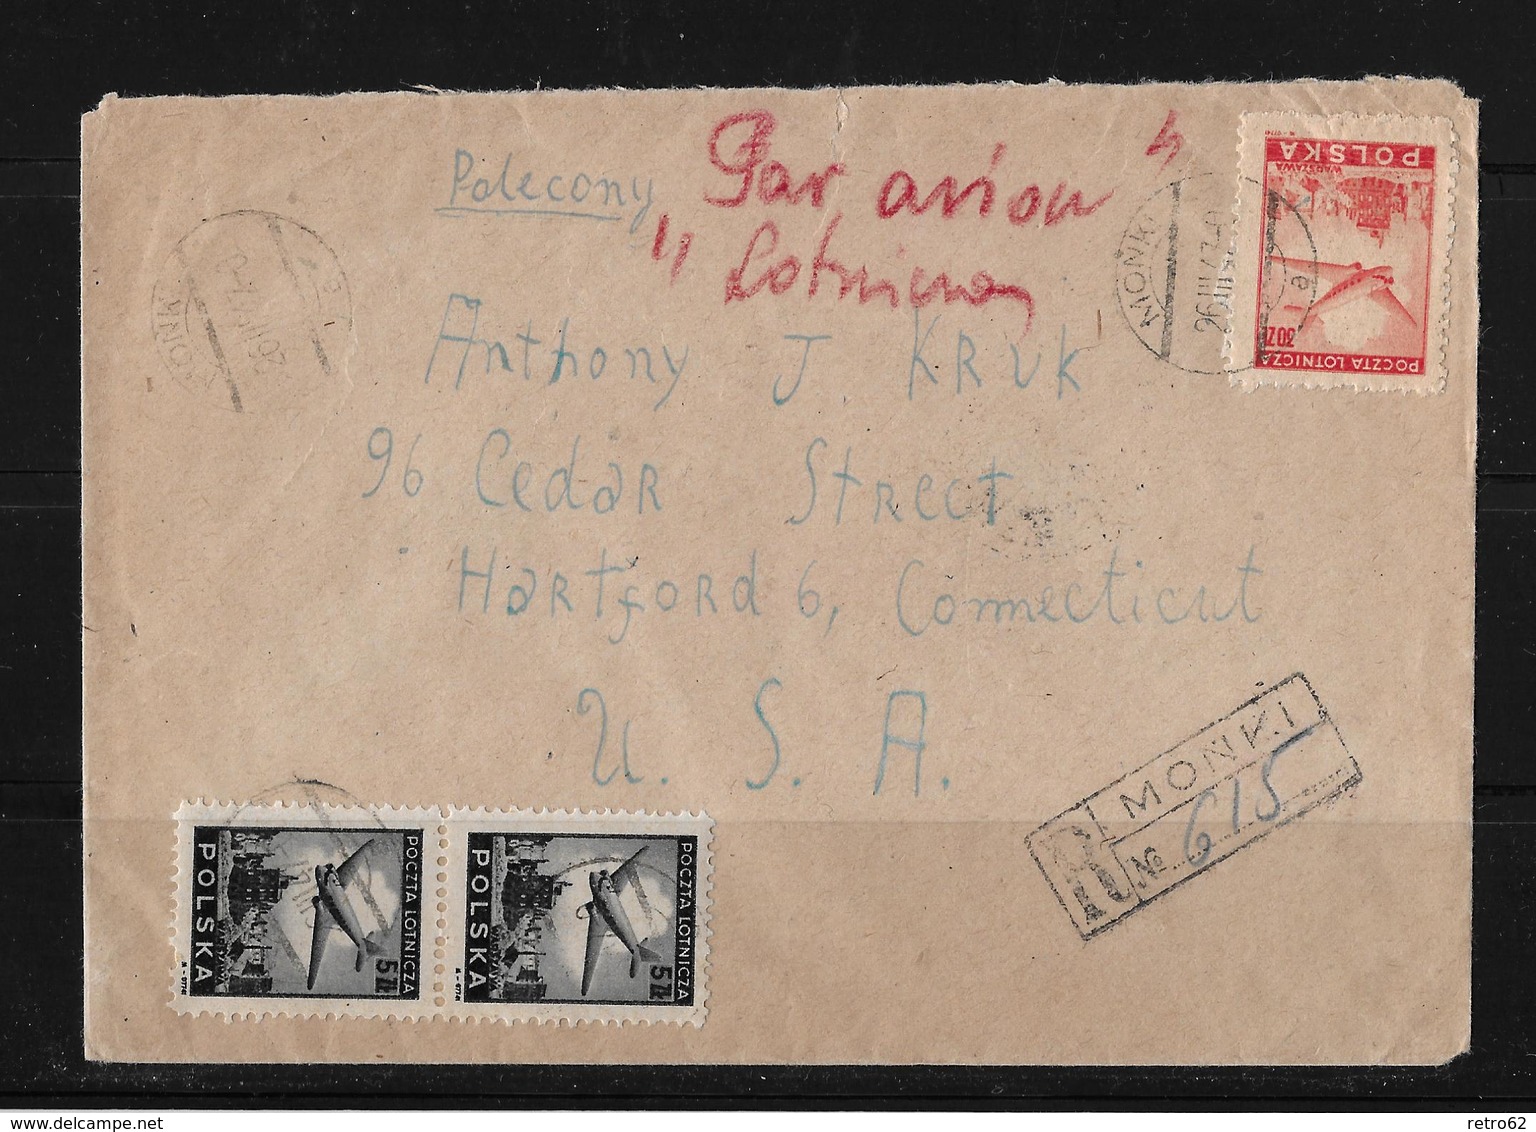 1947 Poland → Postage Paid 40 Zt On Registered Airmail Minki Letter Cover To US - Avions